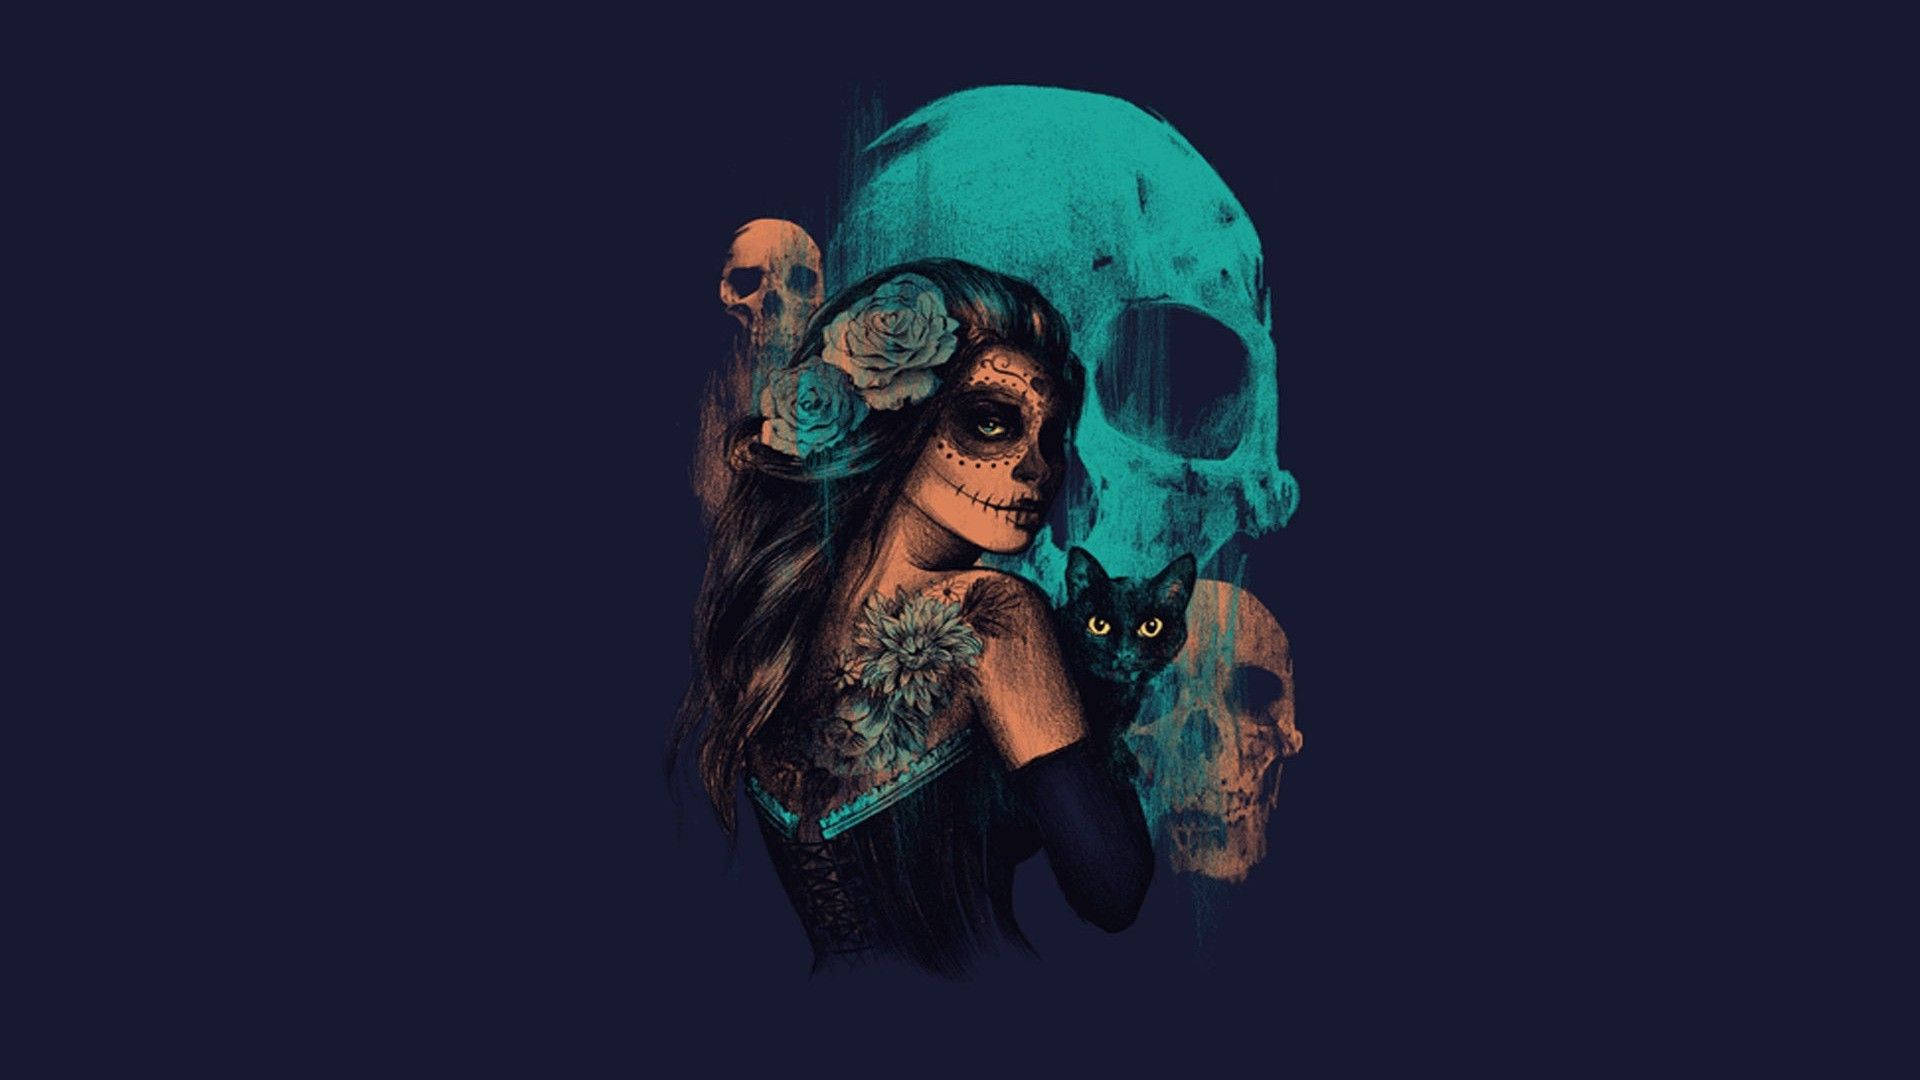 "A Beautiful and Colorful Skull" Wallpaper